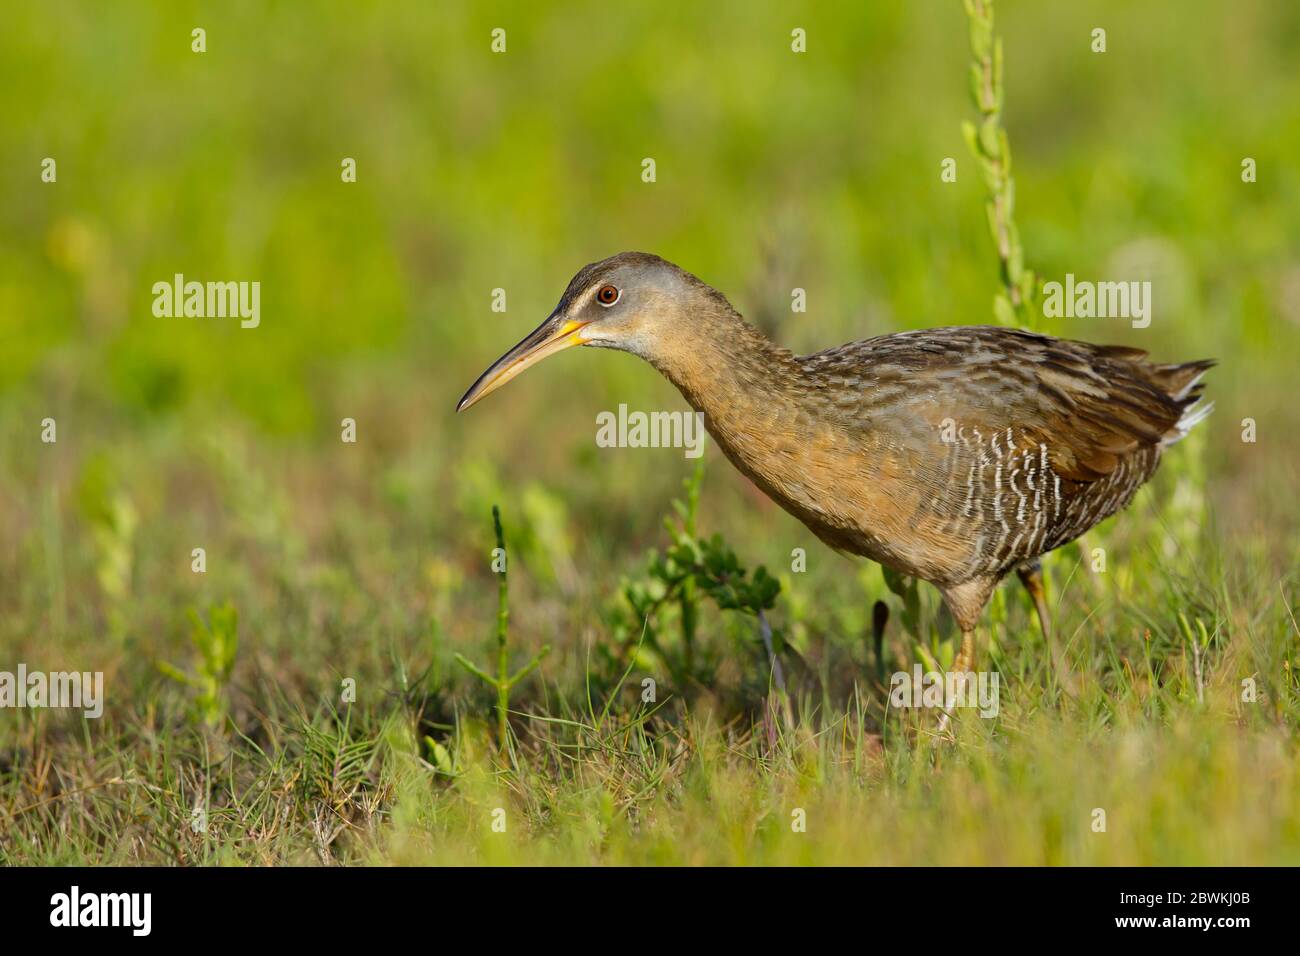 Clapper rail (Rallus crepitans), Adult walking right out in the open in coastal salt marsh in Galveston County, Texas, USA., USA, Texas, Galveston County Stock Photo